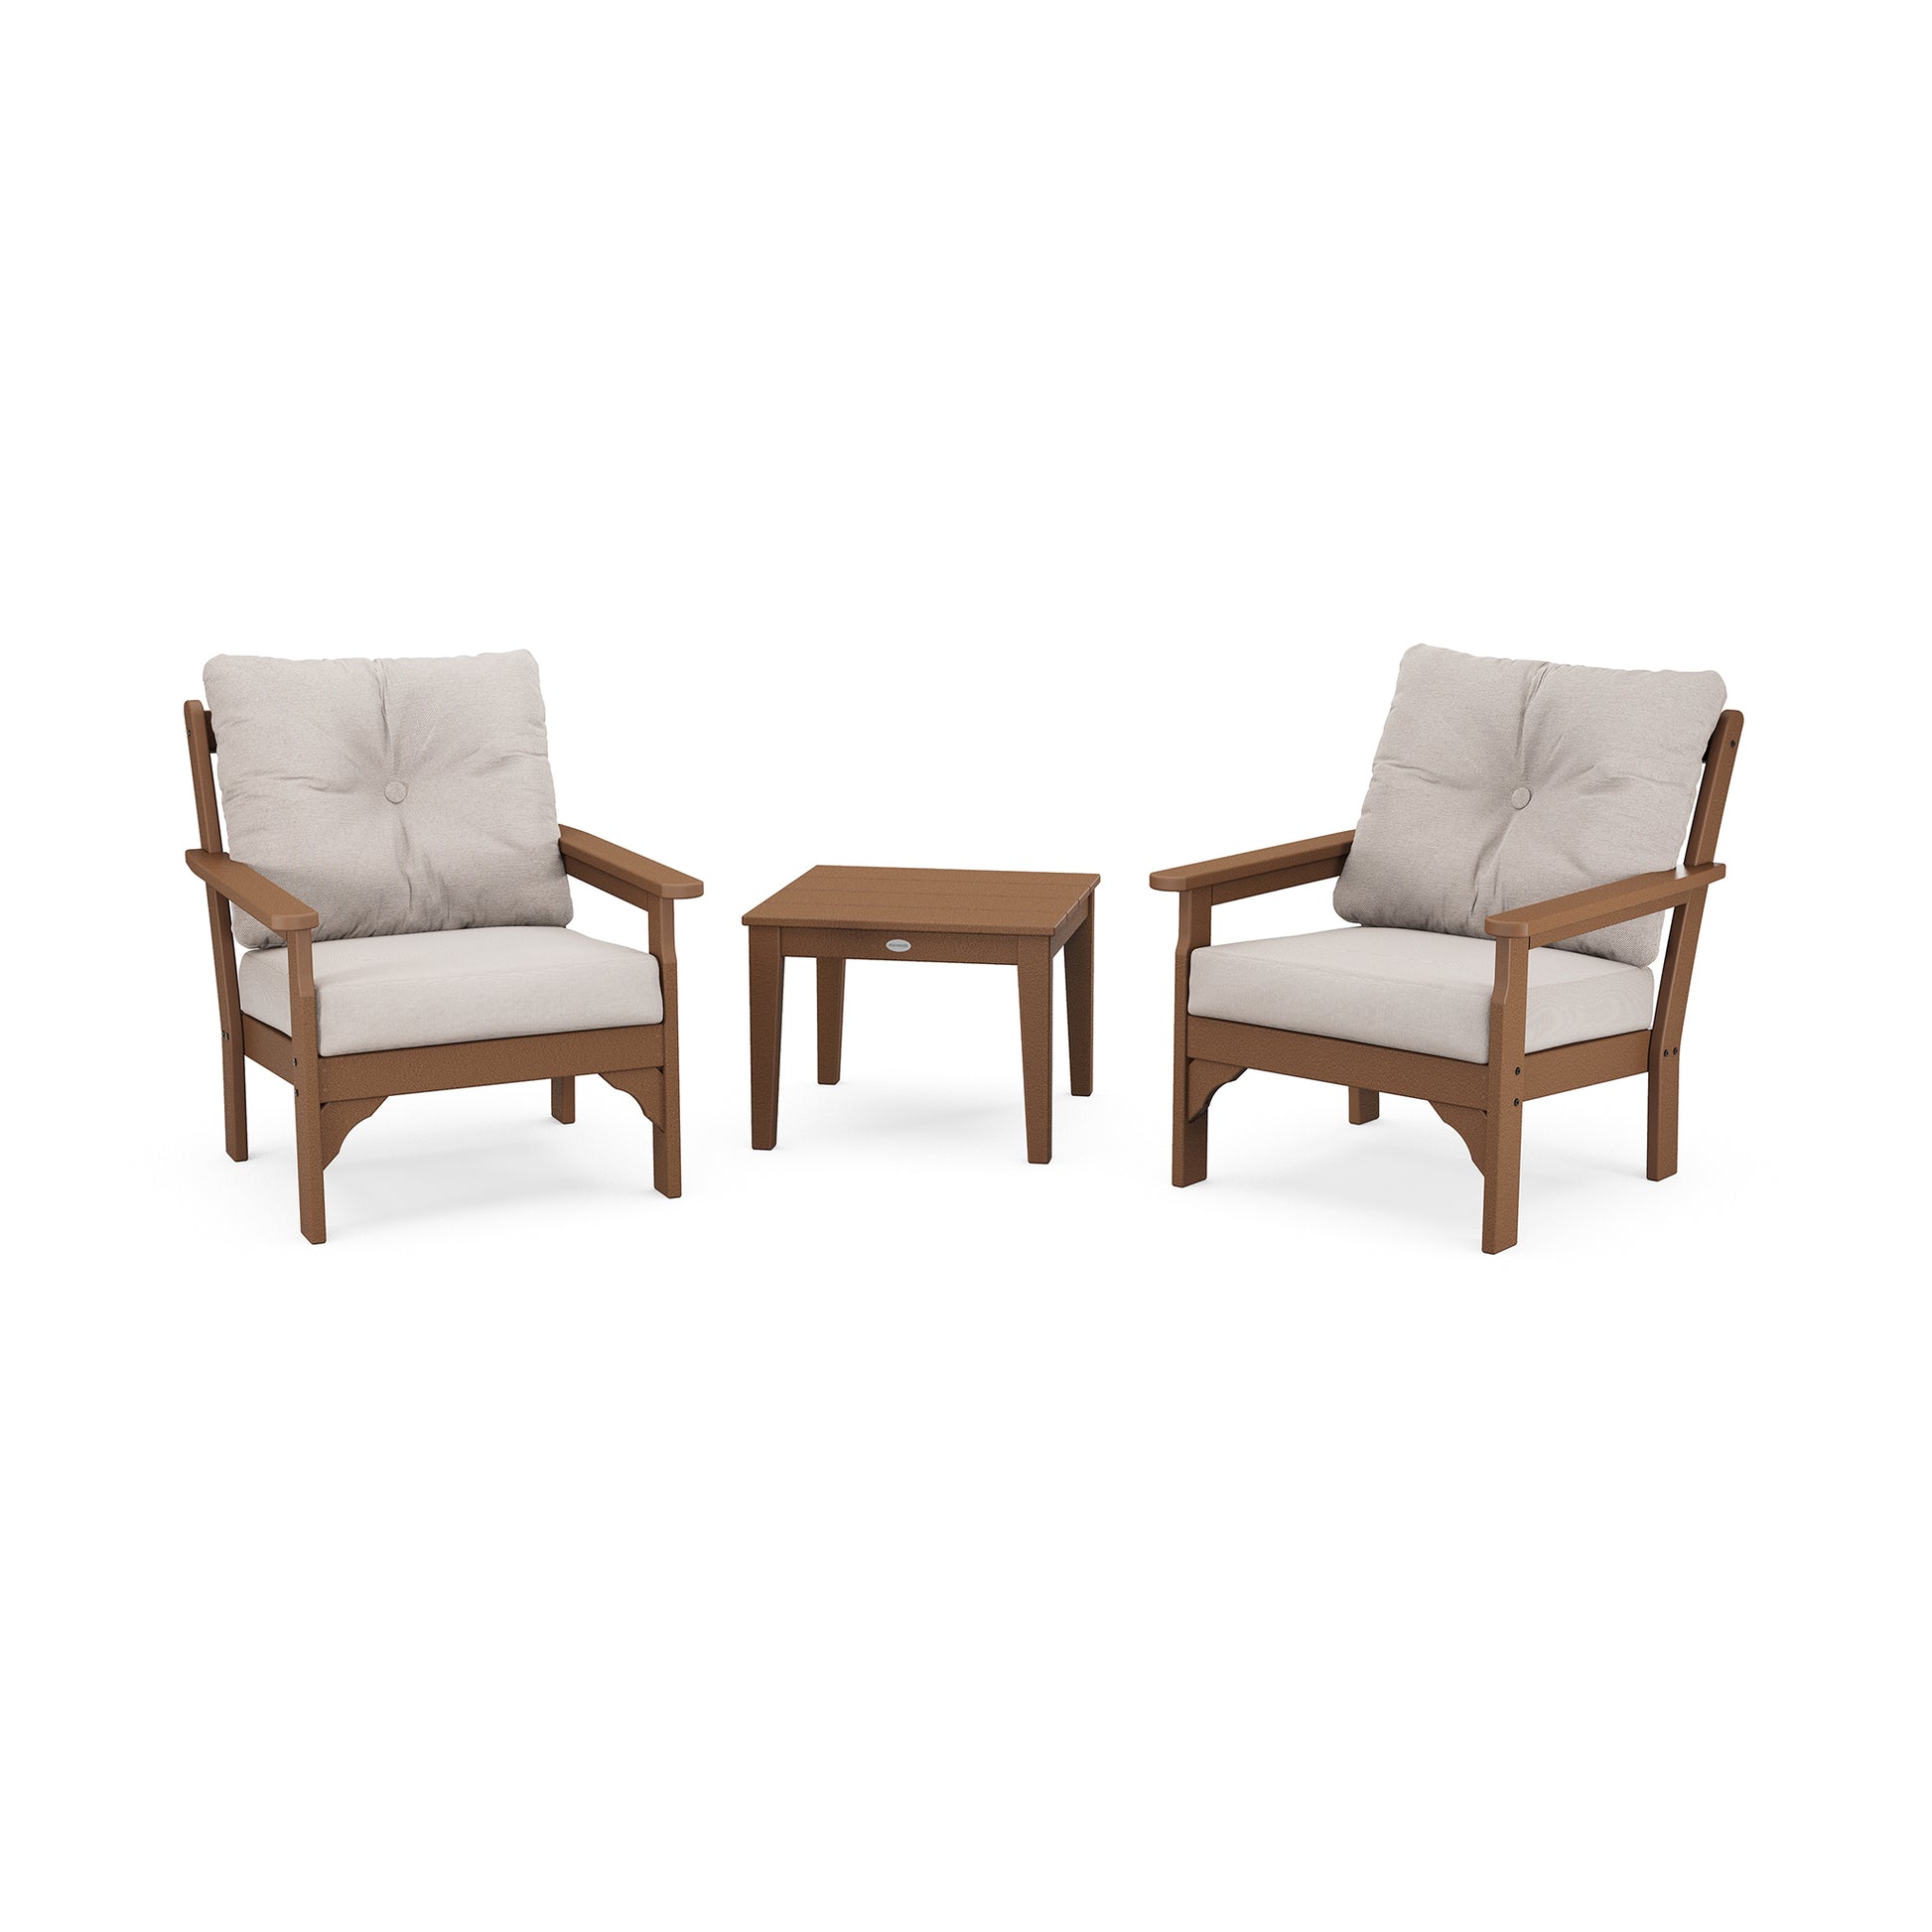 Two POLYWOOD Vineyard beige upholstered patio chairs with deep seating cushions and brown wooden frames positioned on either side of a matching small square wooden table, all against a plain white background.